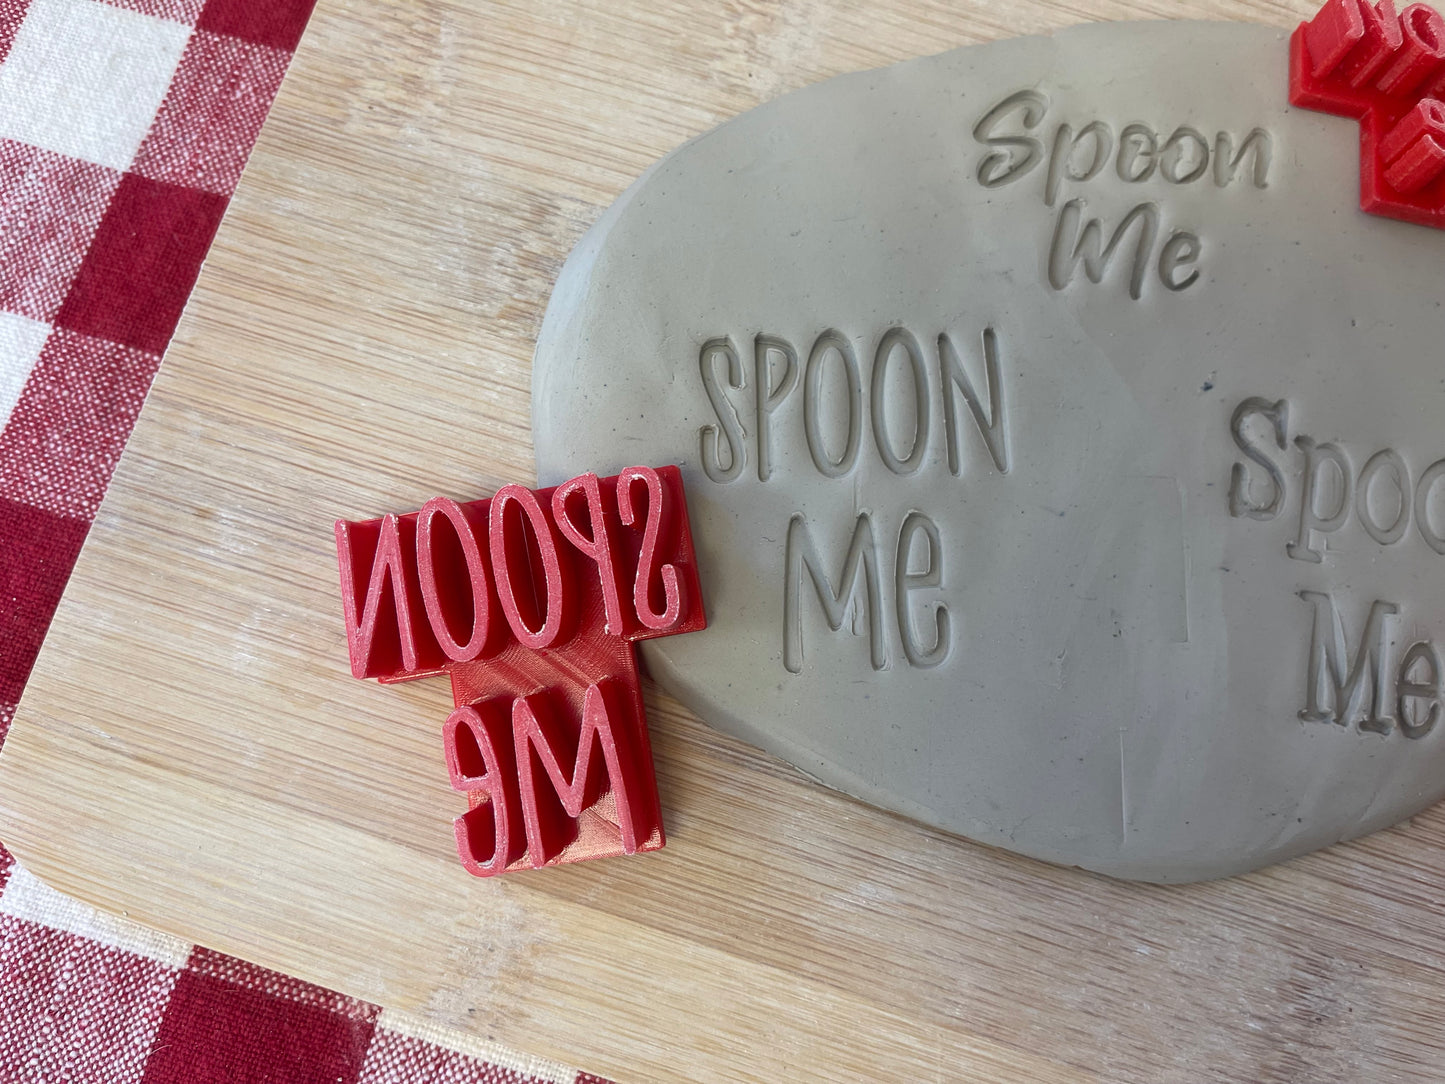 "Spoon Me" word stamp - for Spoon rest, plastic 3D printed, multiple sizes